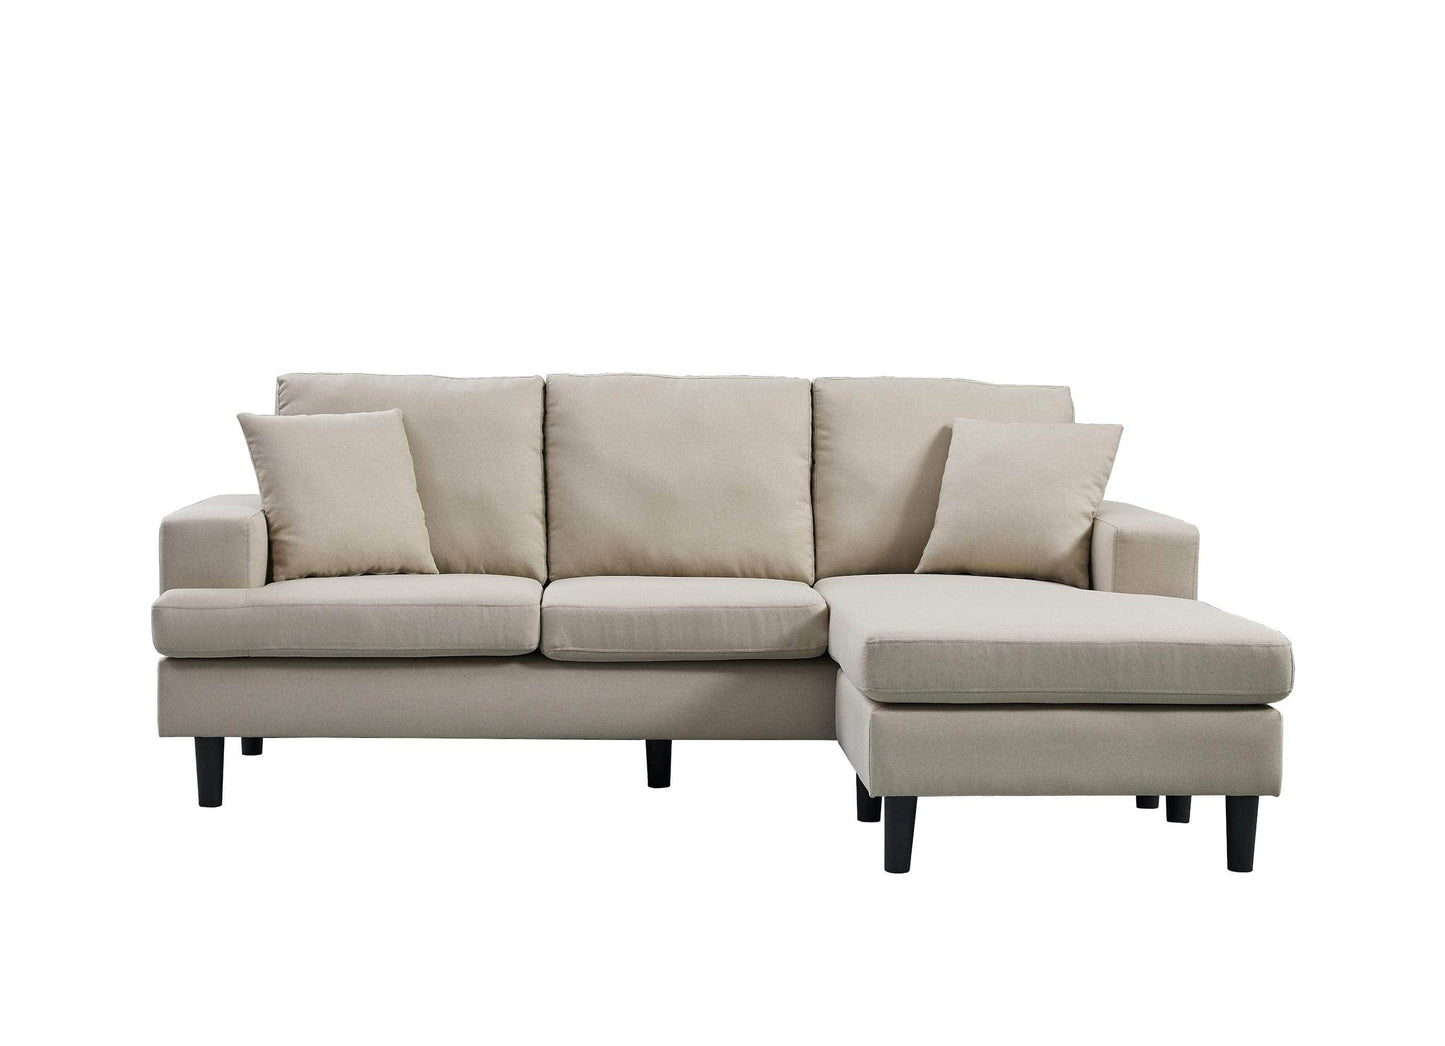 Urban Cali Sectional Cream Sophia 84" Wide Sectional Sofa with Reversible Chaise - Available in 4 Colours